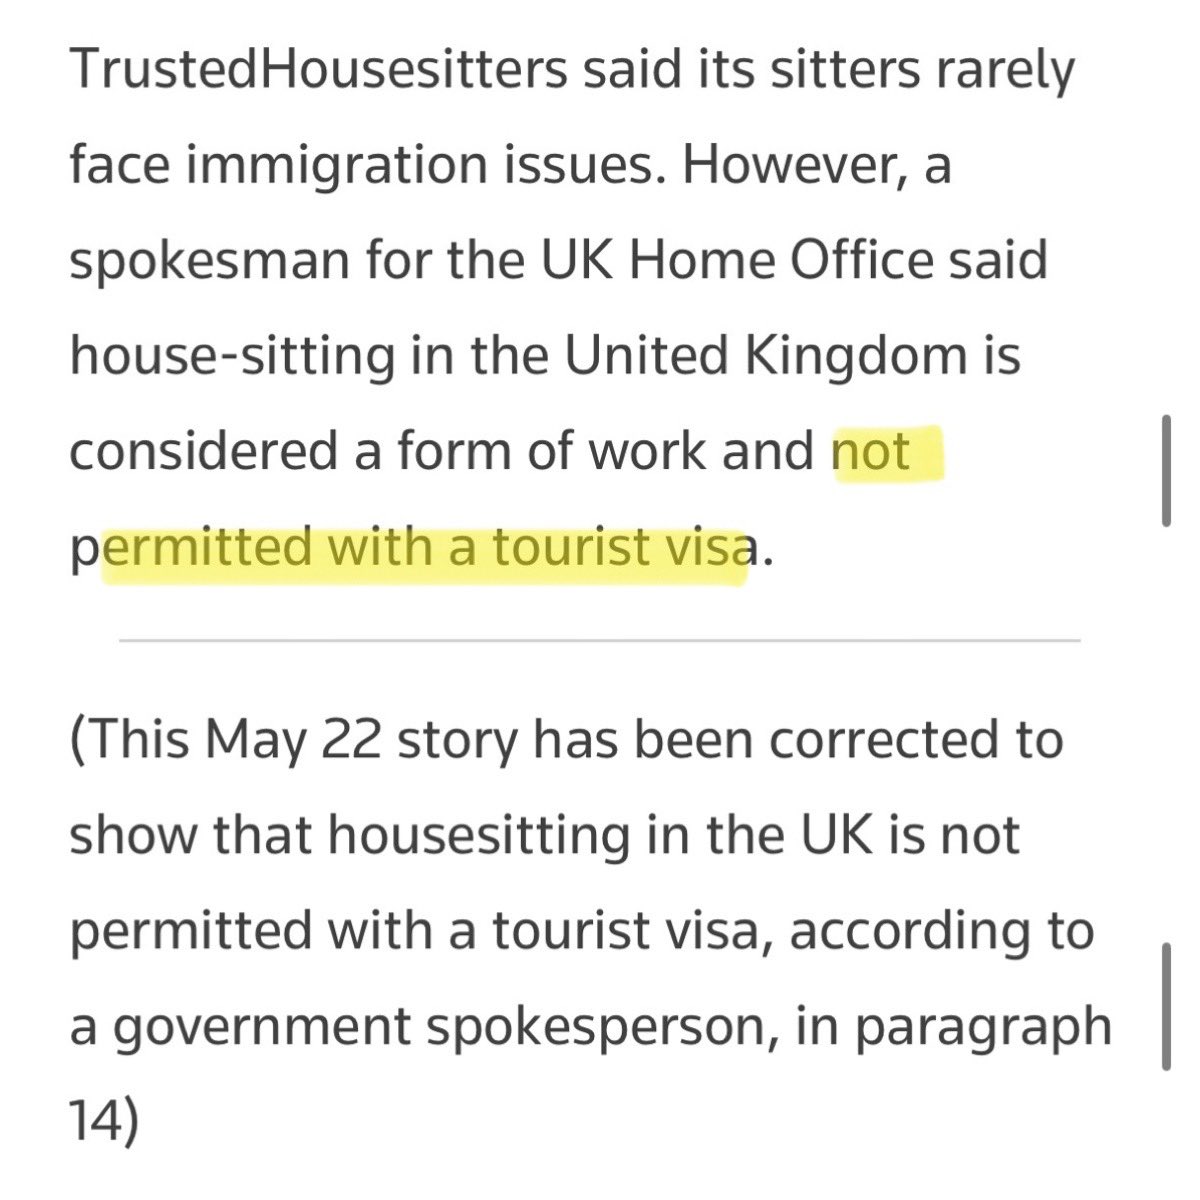 Would you look at that—@housesitting through #TrustedHousesitters NOT ALLOWED on a tourist visa. Visitors wanting to house sit in the UK need a work visa.

Thank you for *finally* reaching out to @ukhomeoffice, @thomsonreuters

#budgettravel #travelhack #housesitting #immigration